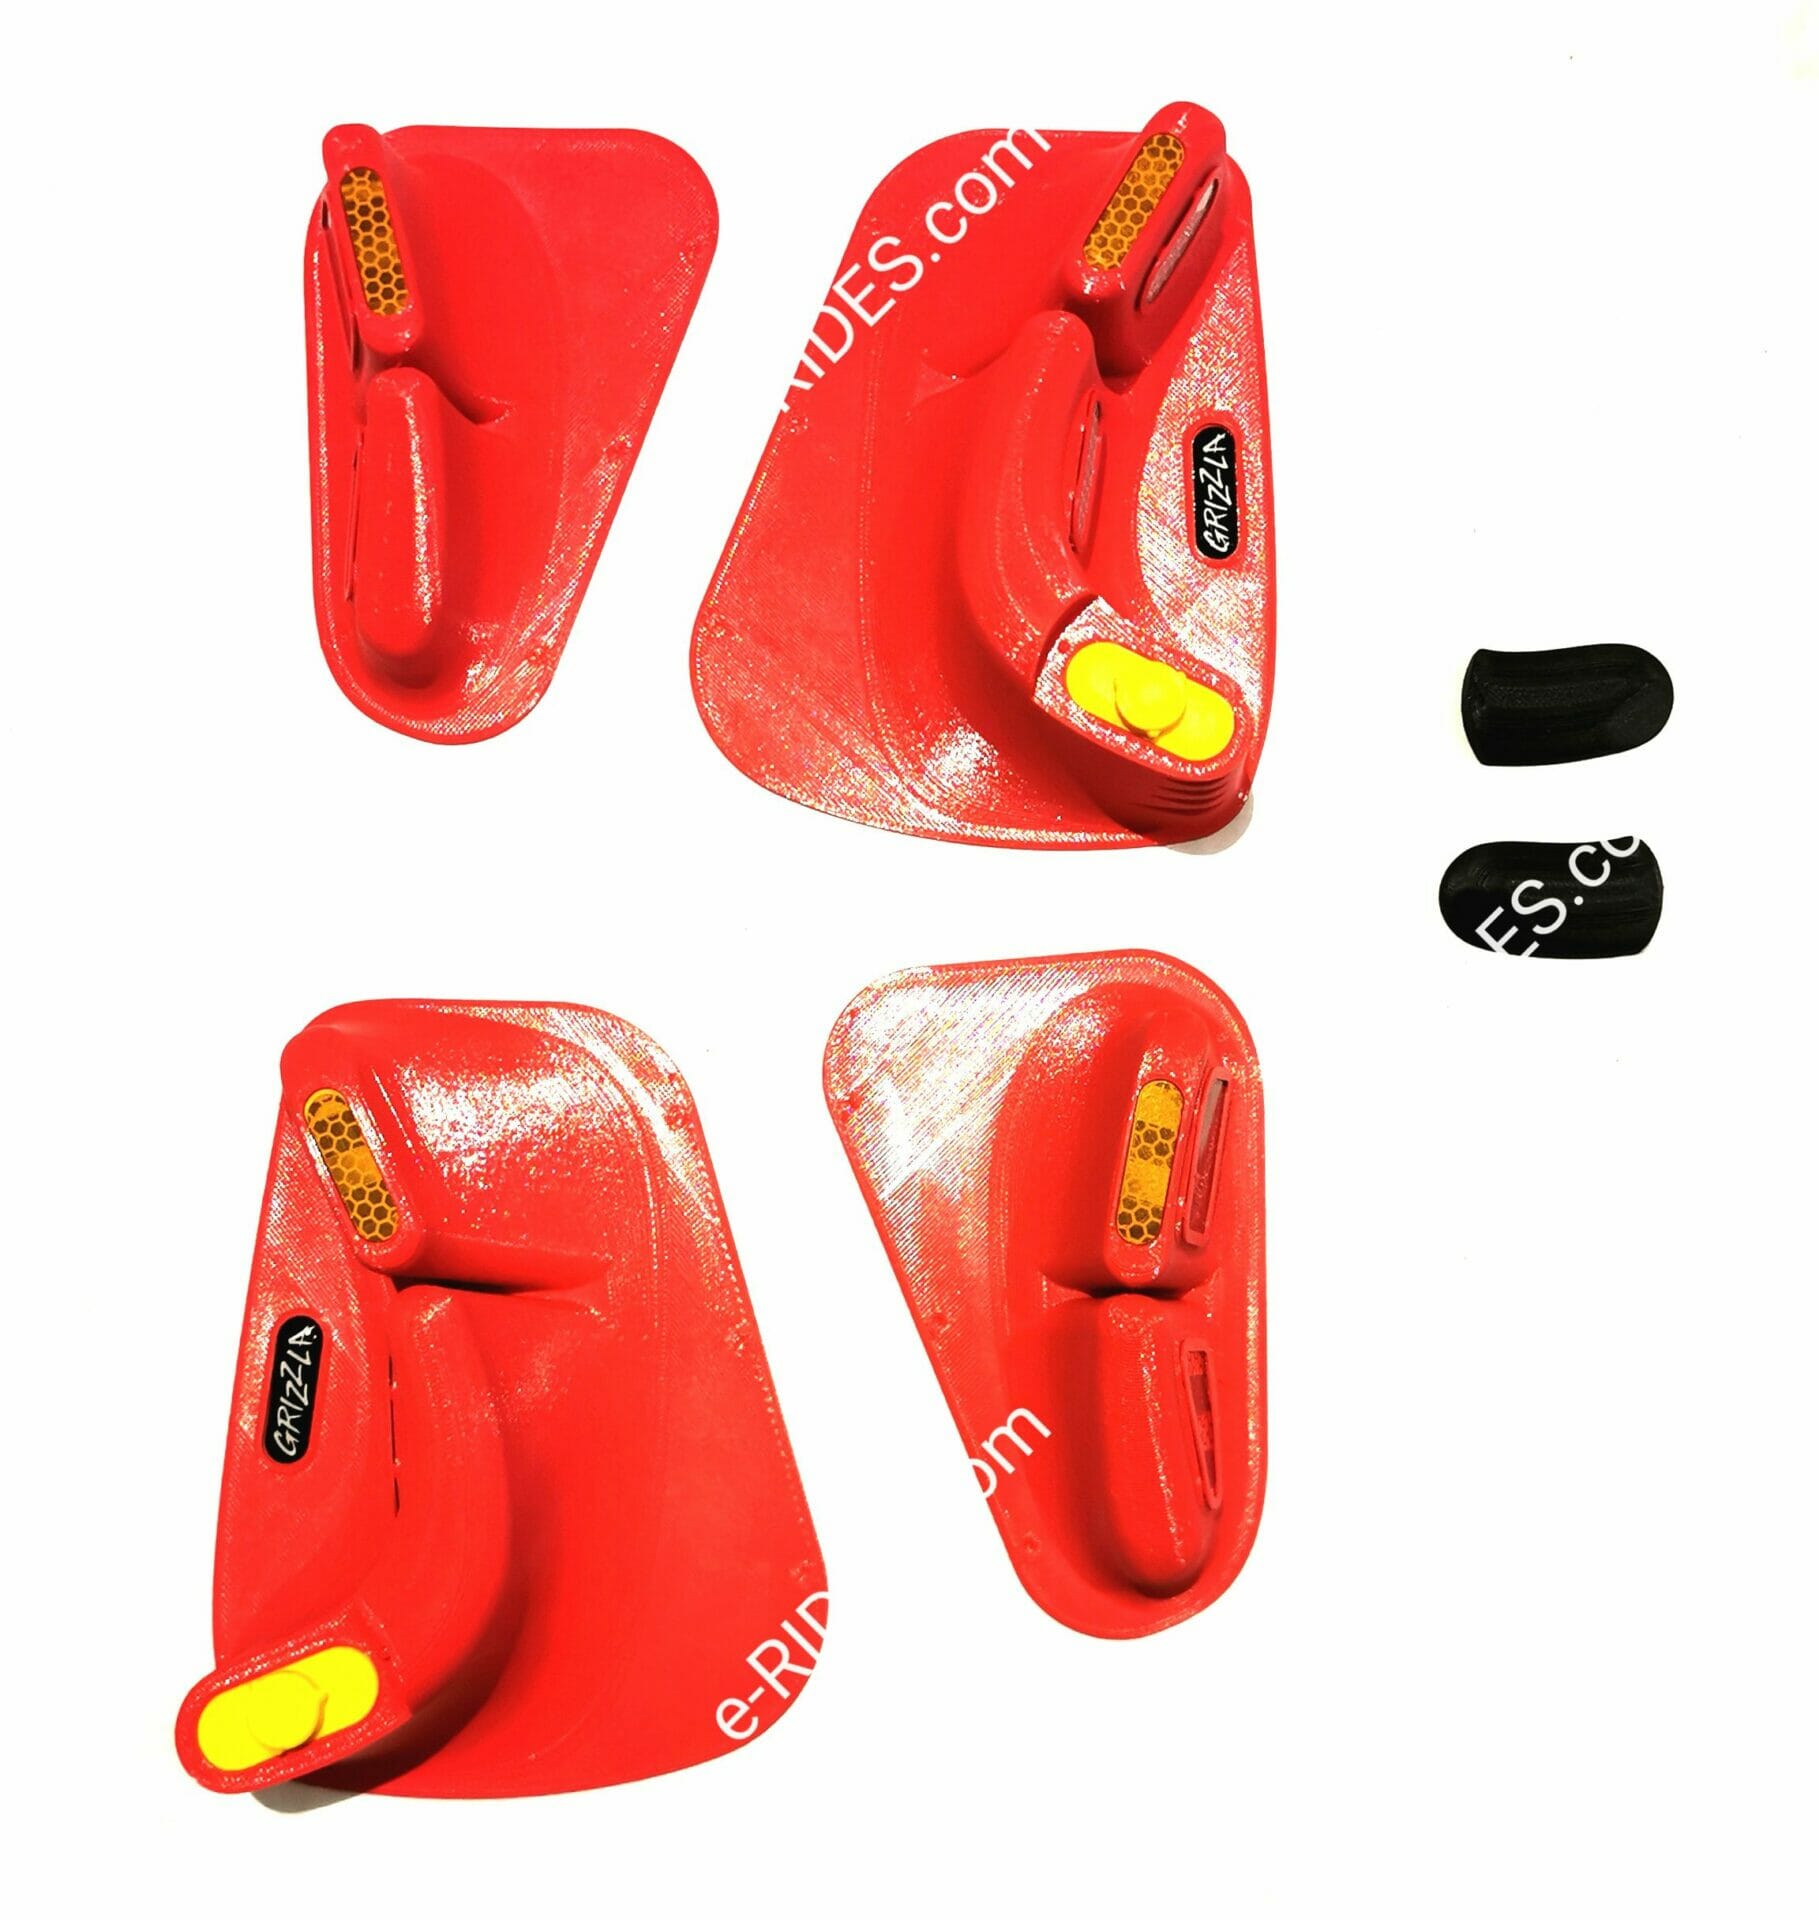 Grizzla pads reflective set red front red back black bumper